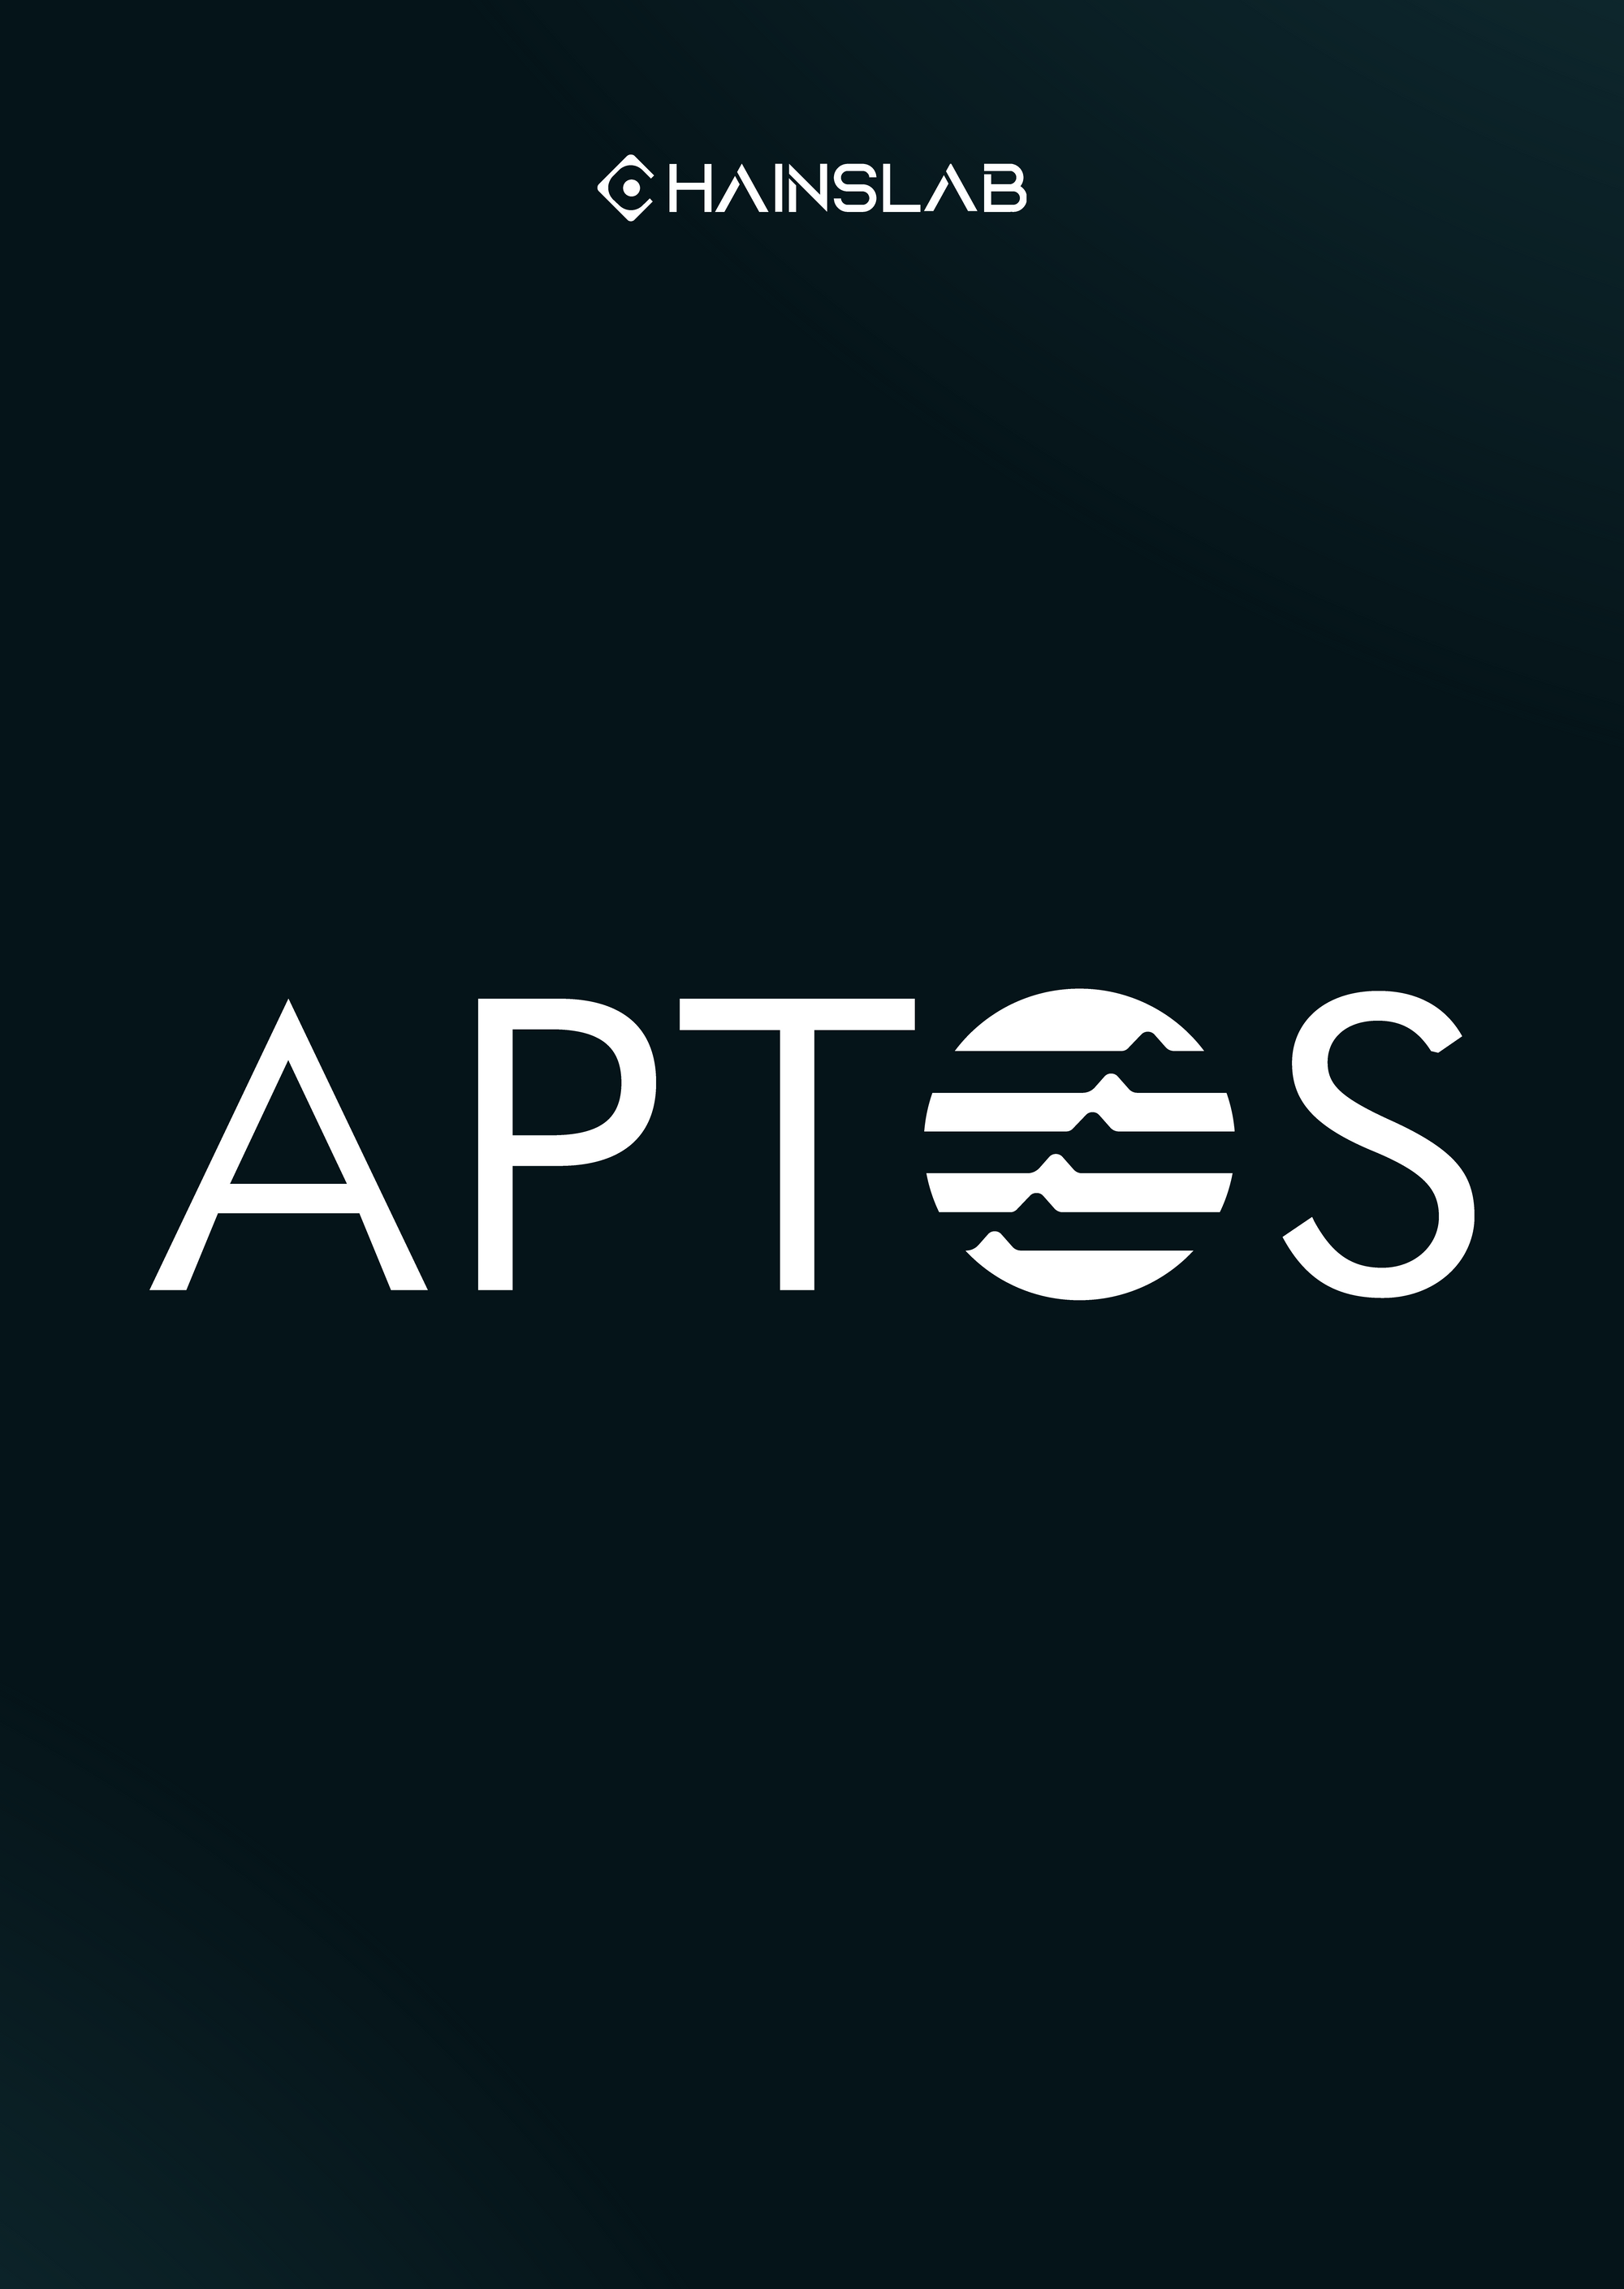 What Is Aptos Blockchain? A New VCs' Darling